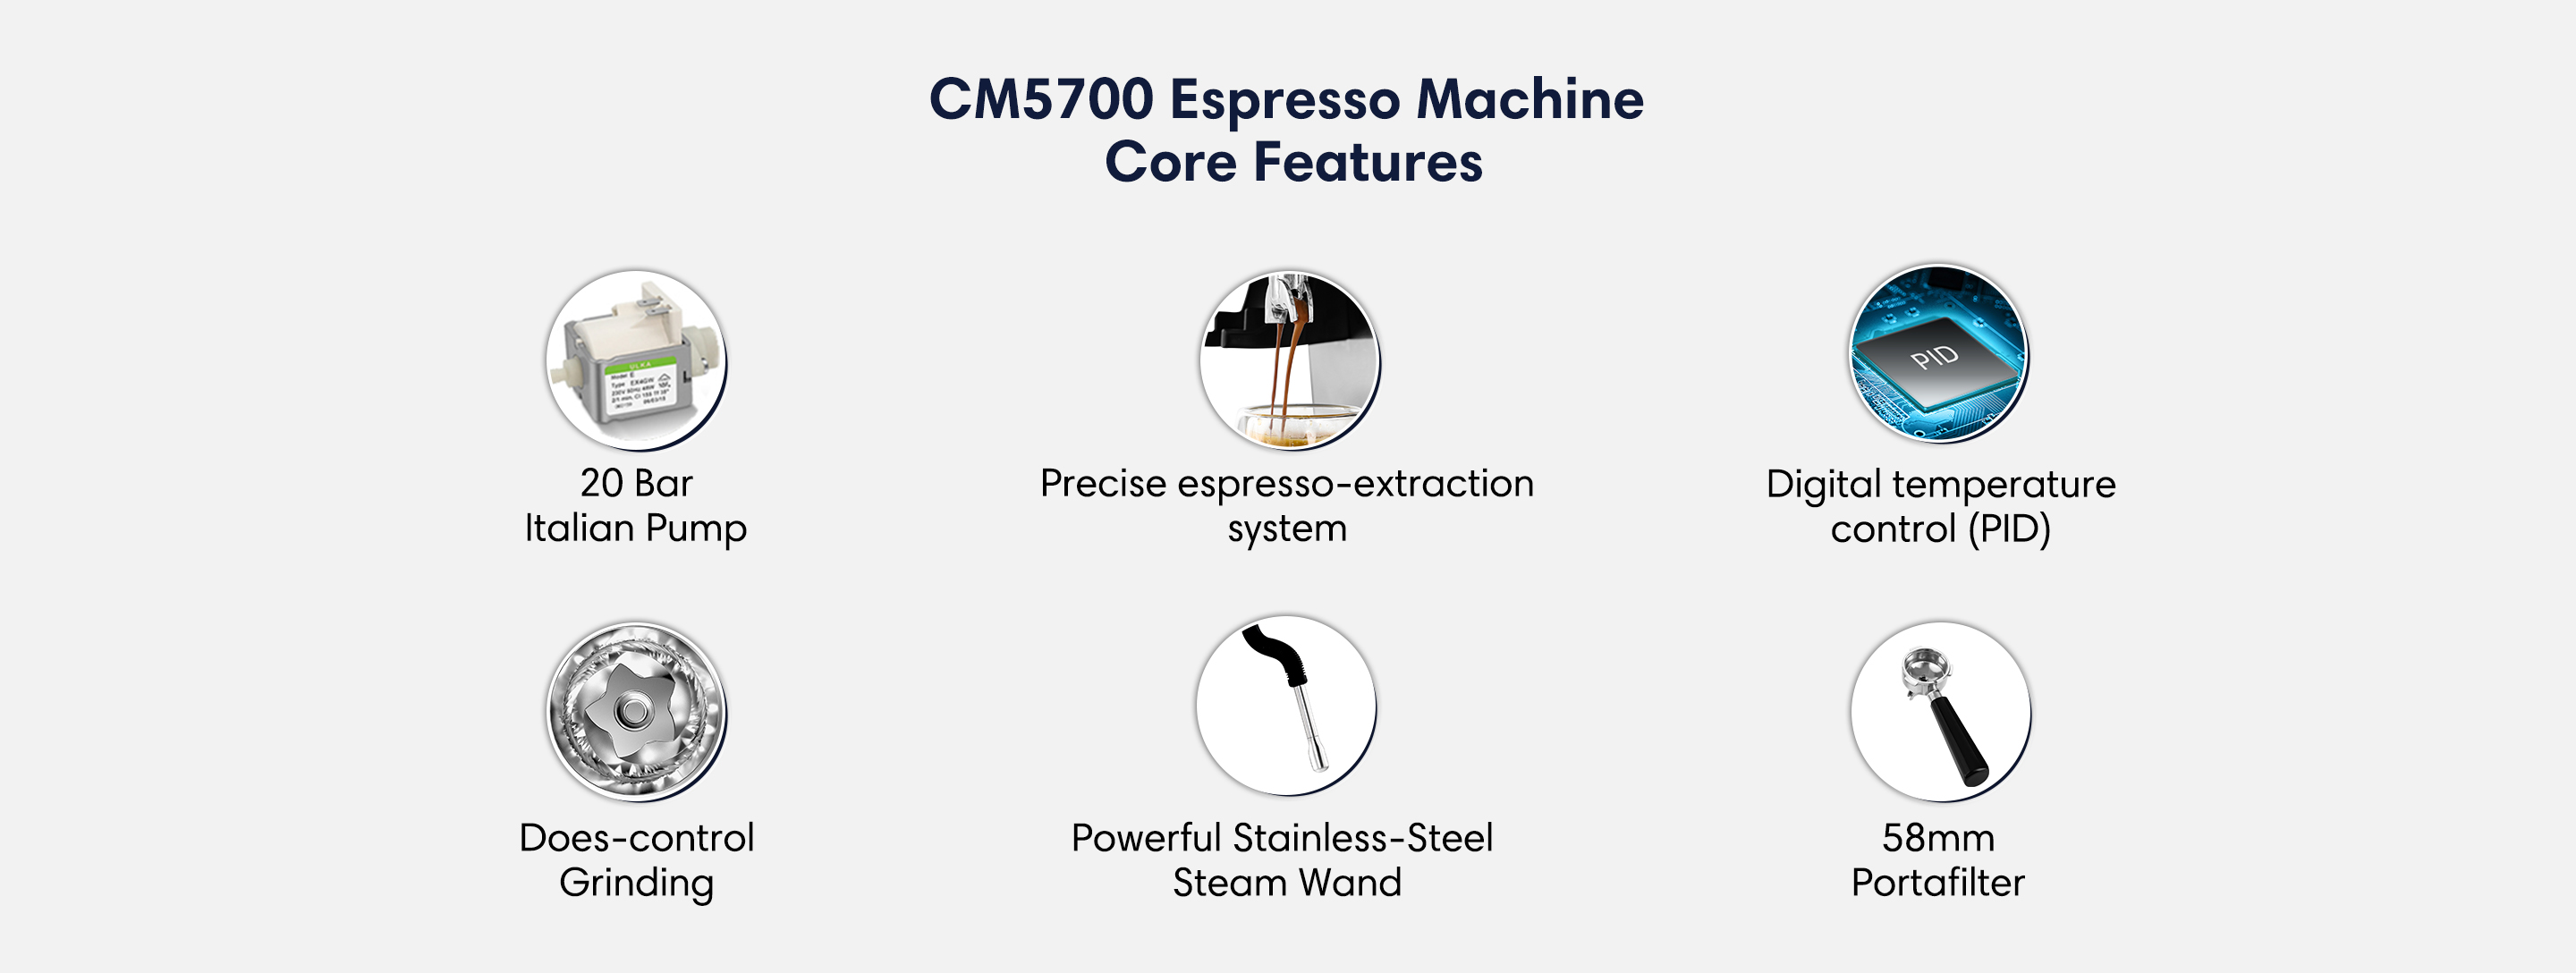 CM5700 espresso machine core features 20 bar Italian pump precise espresso-extraction system digital temperature control dose-control grinding stainless and powerful milk frother 58mm stainless steel portafilter